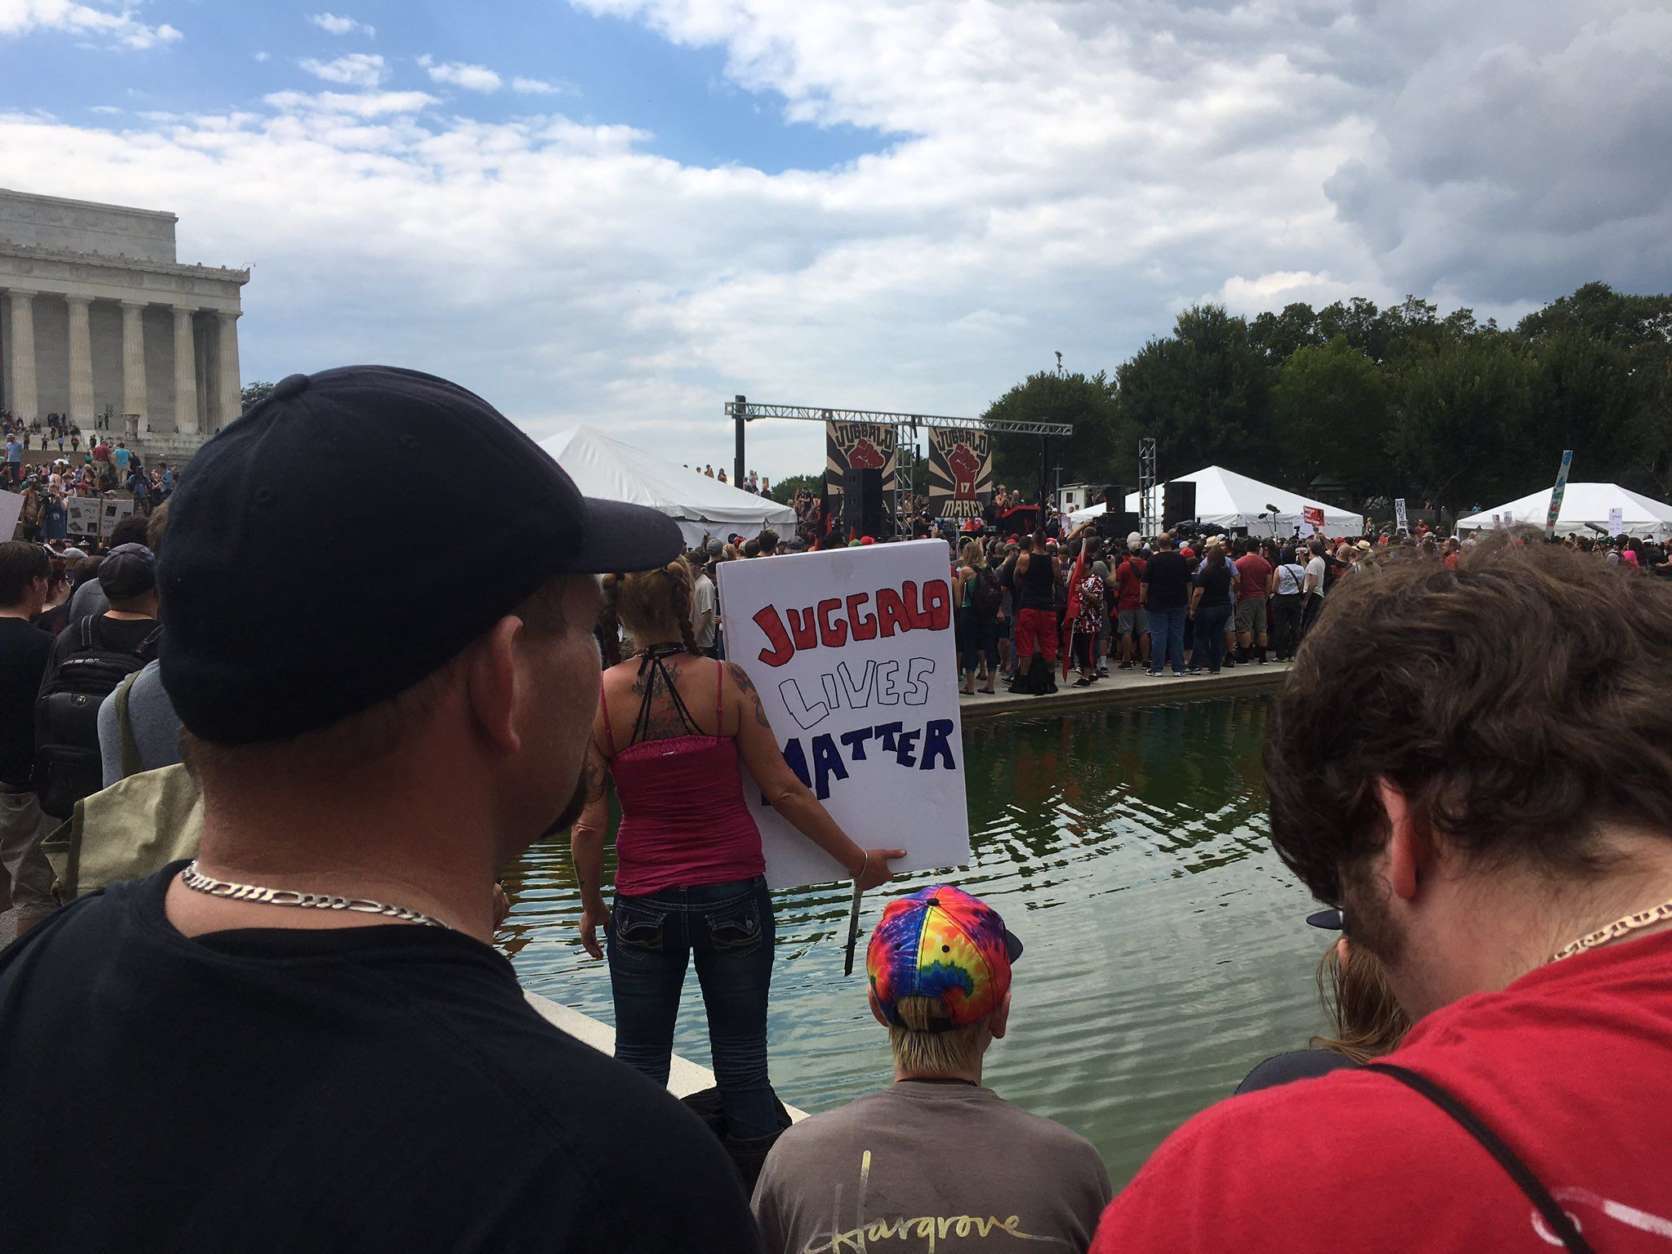 The crowd grows along the reflecting pool for the Juggalo March Sept. 16, 2017. (WTOP/Mike Murillo)